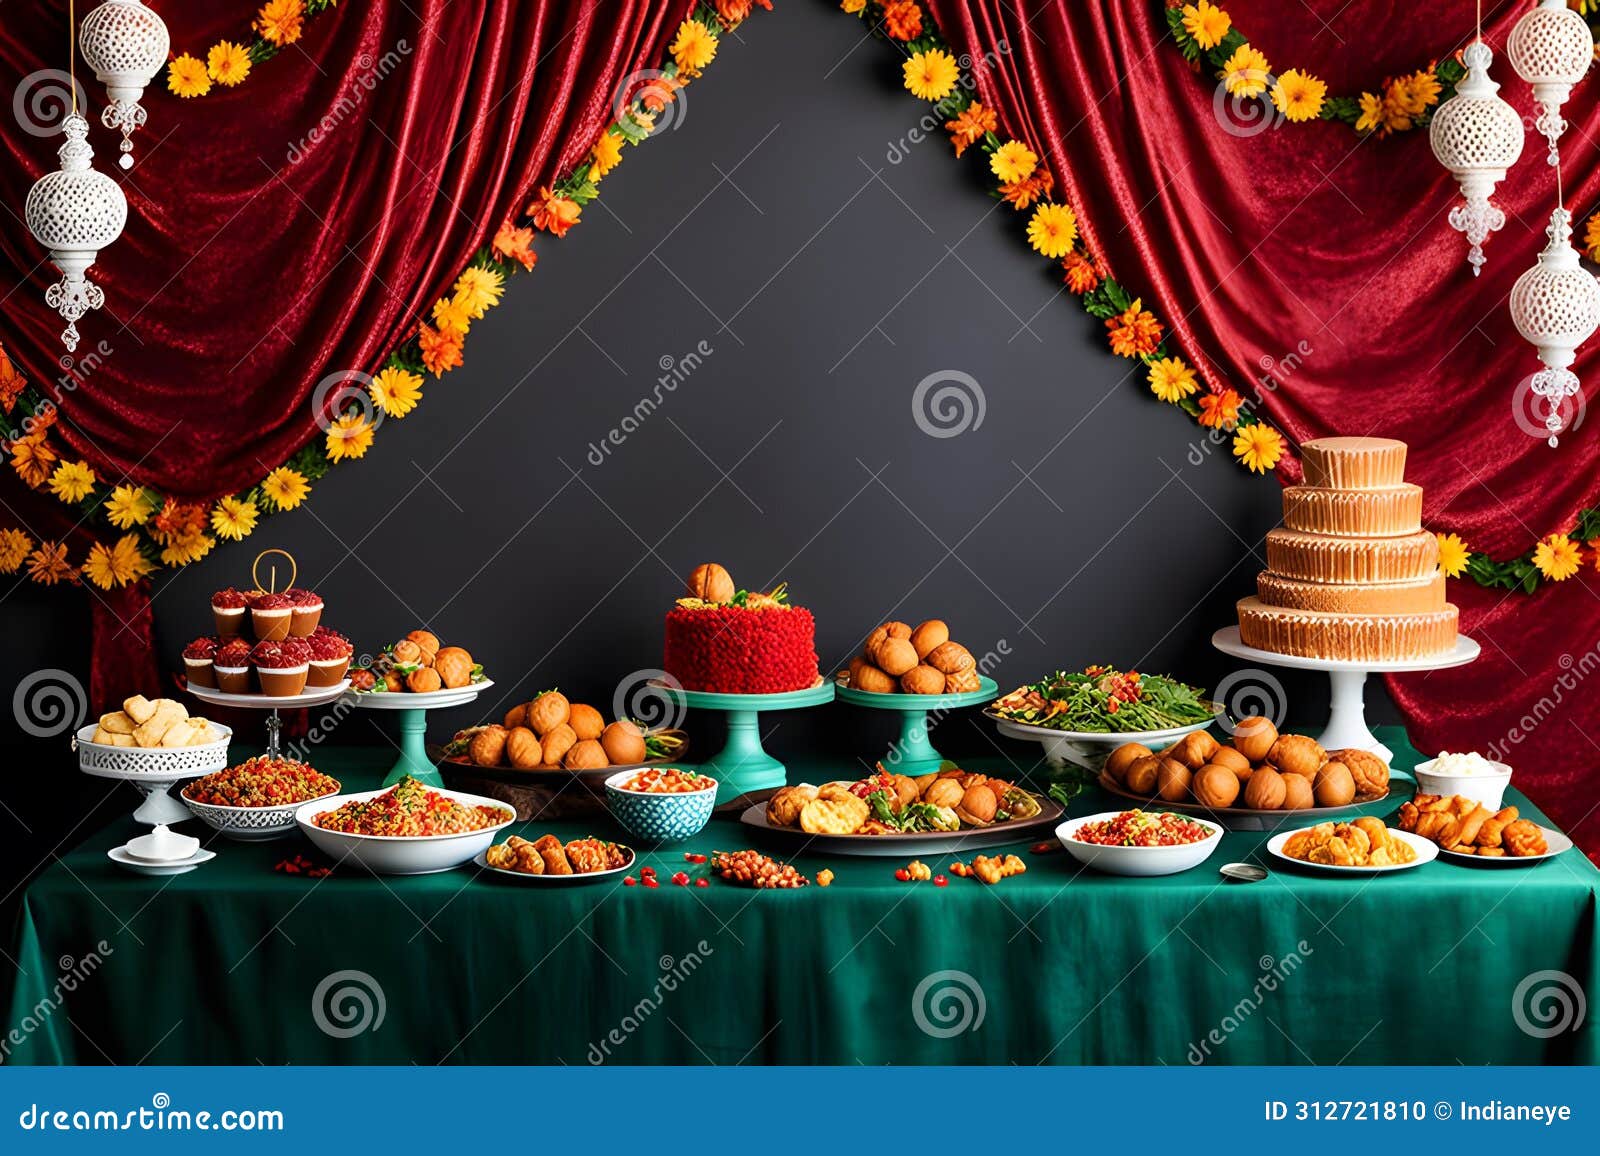 showcase festive feasts against a celebratory backdrop with room for text